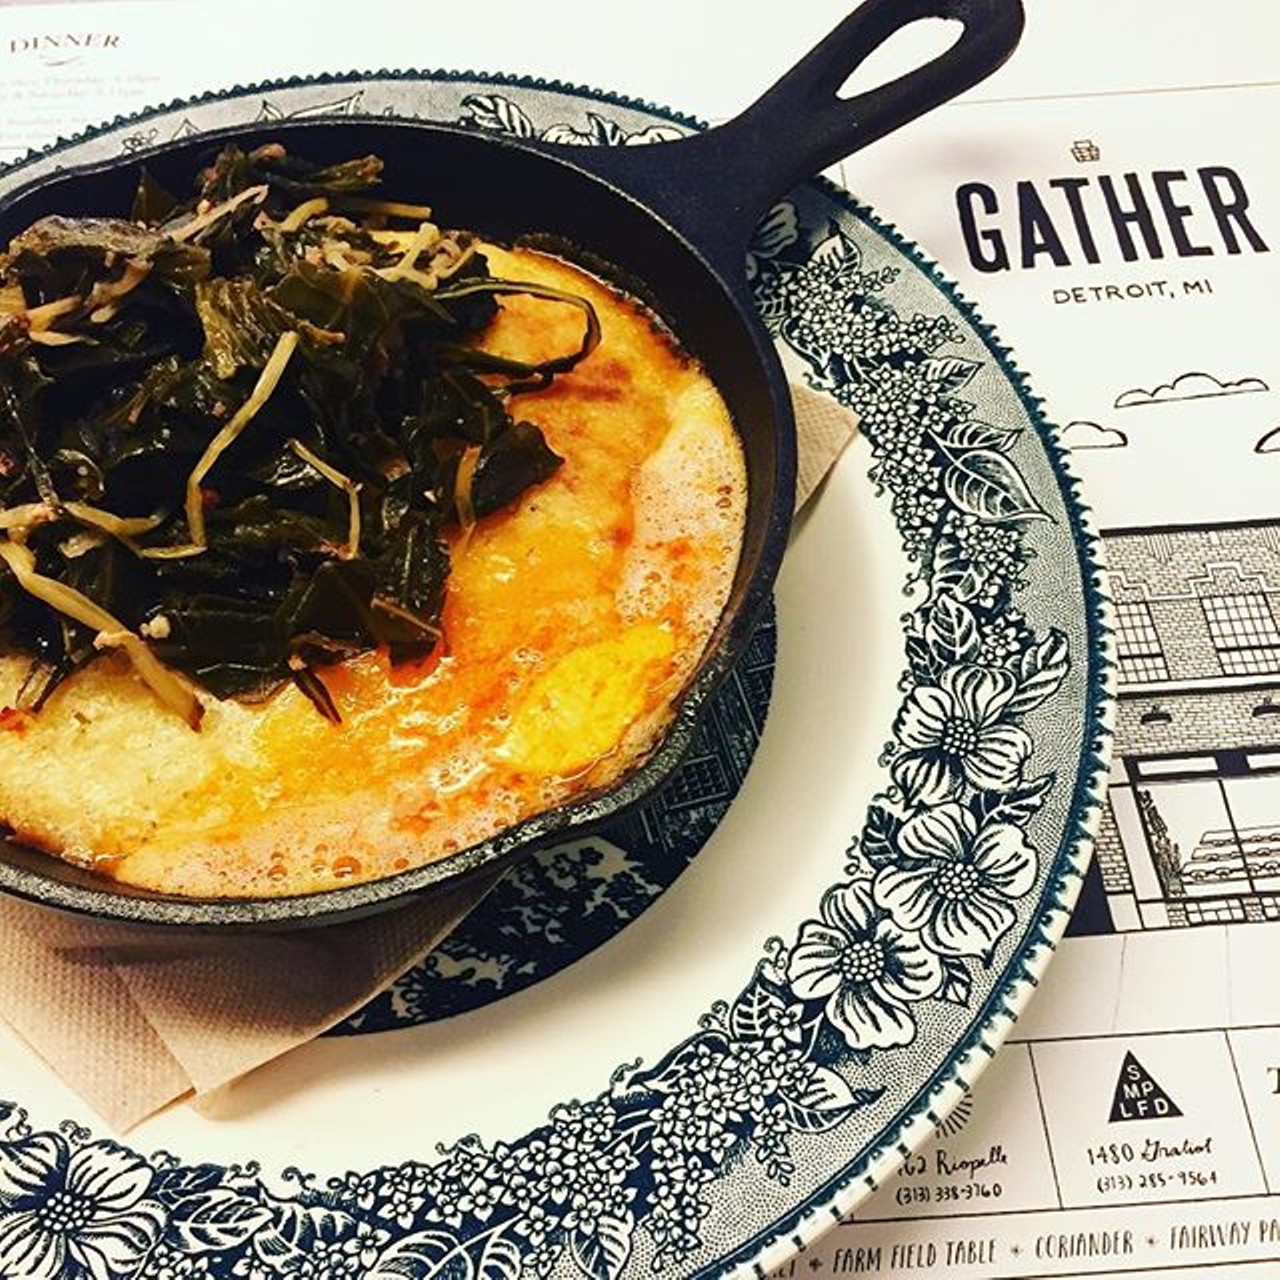 Must try: Corn bread with first frost braised greens, sweet corn, and confit tomato butter.